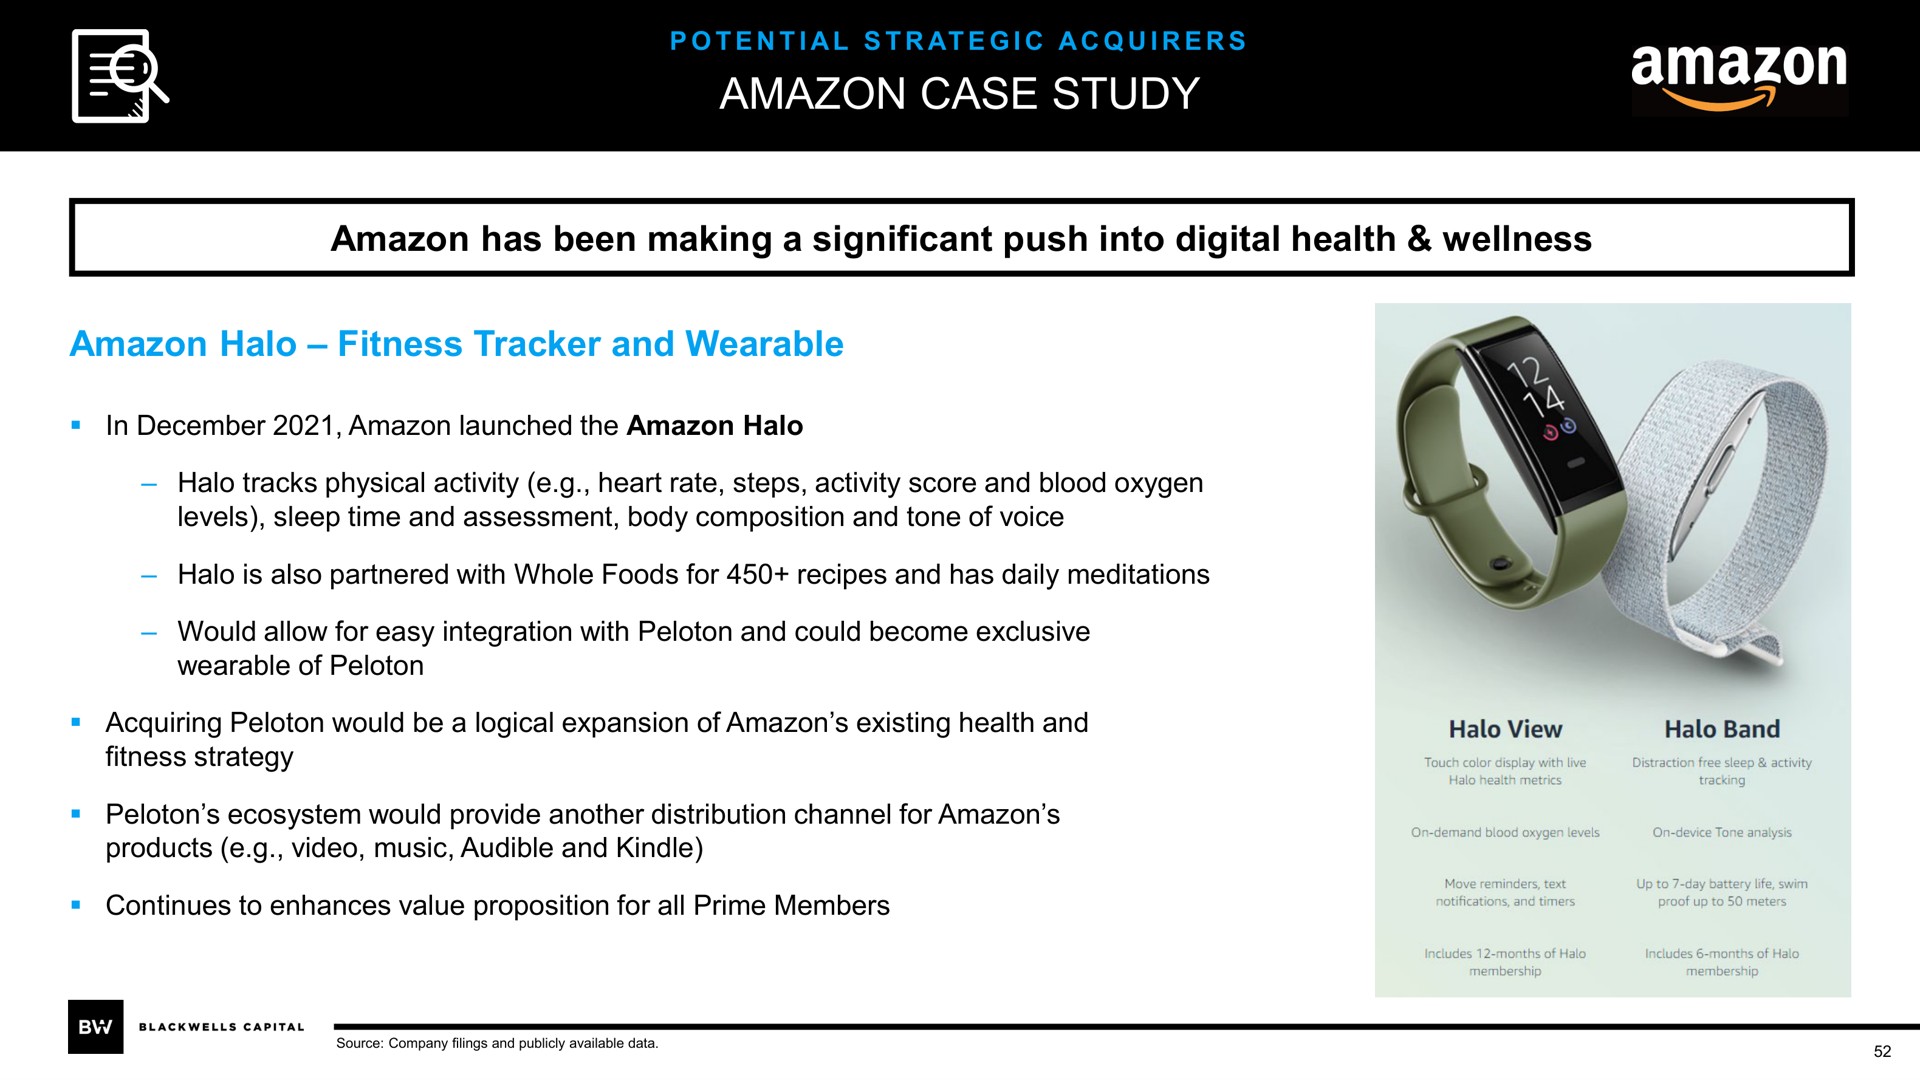 case study has been making a significant push into digital health wellness halo fitness tracker and wearable | Blackwells Capital